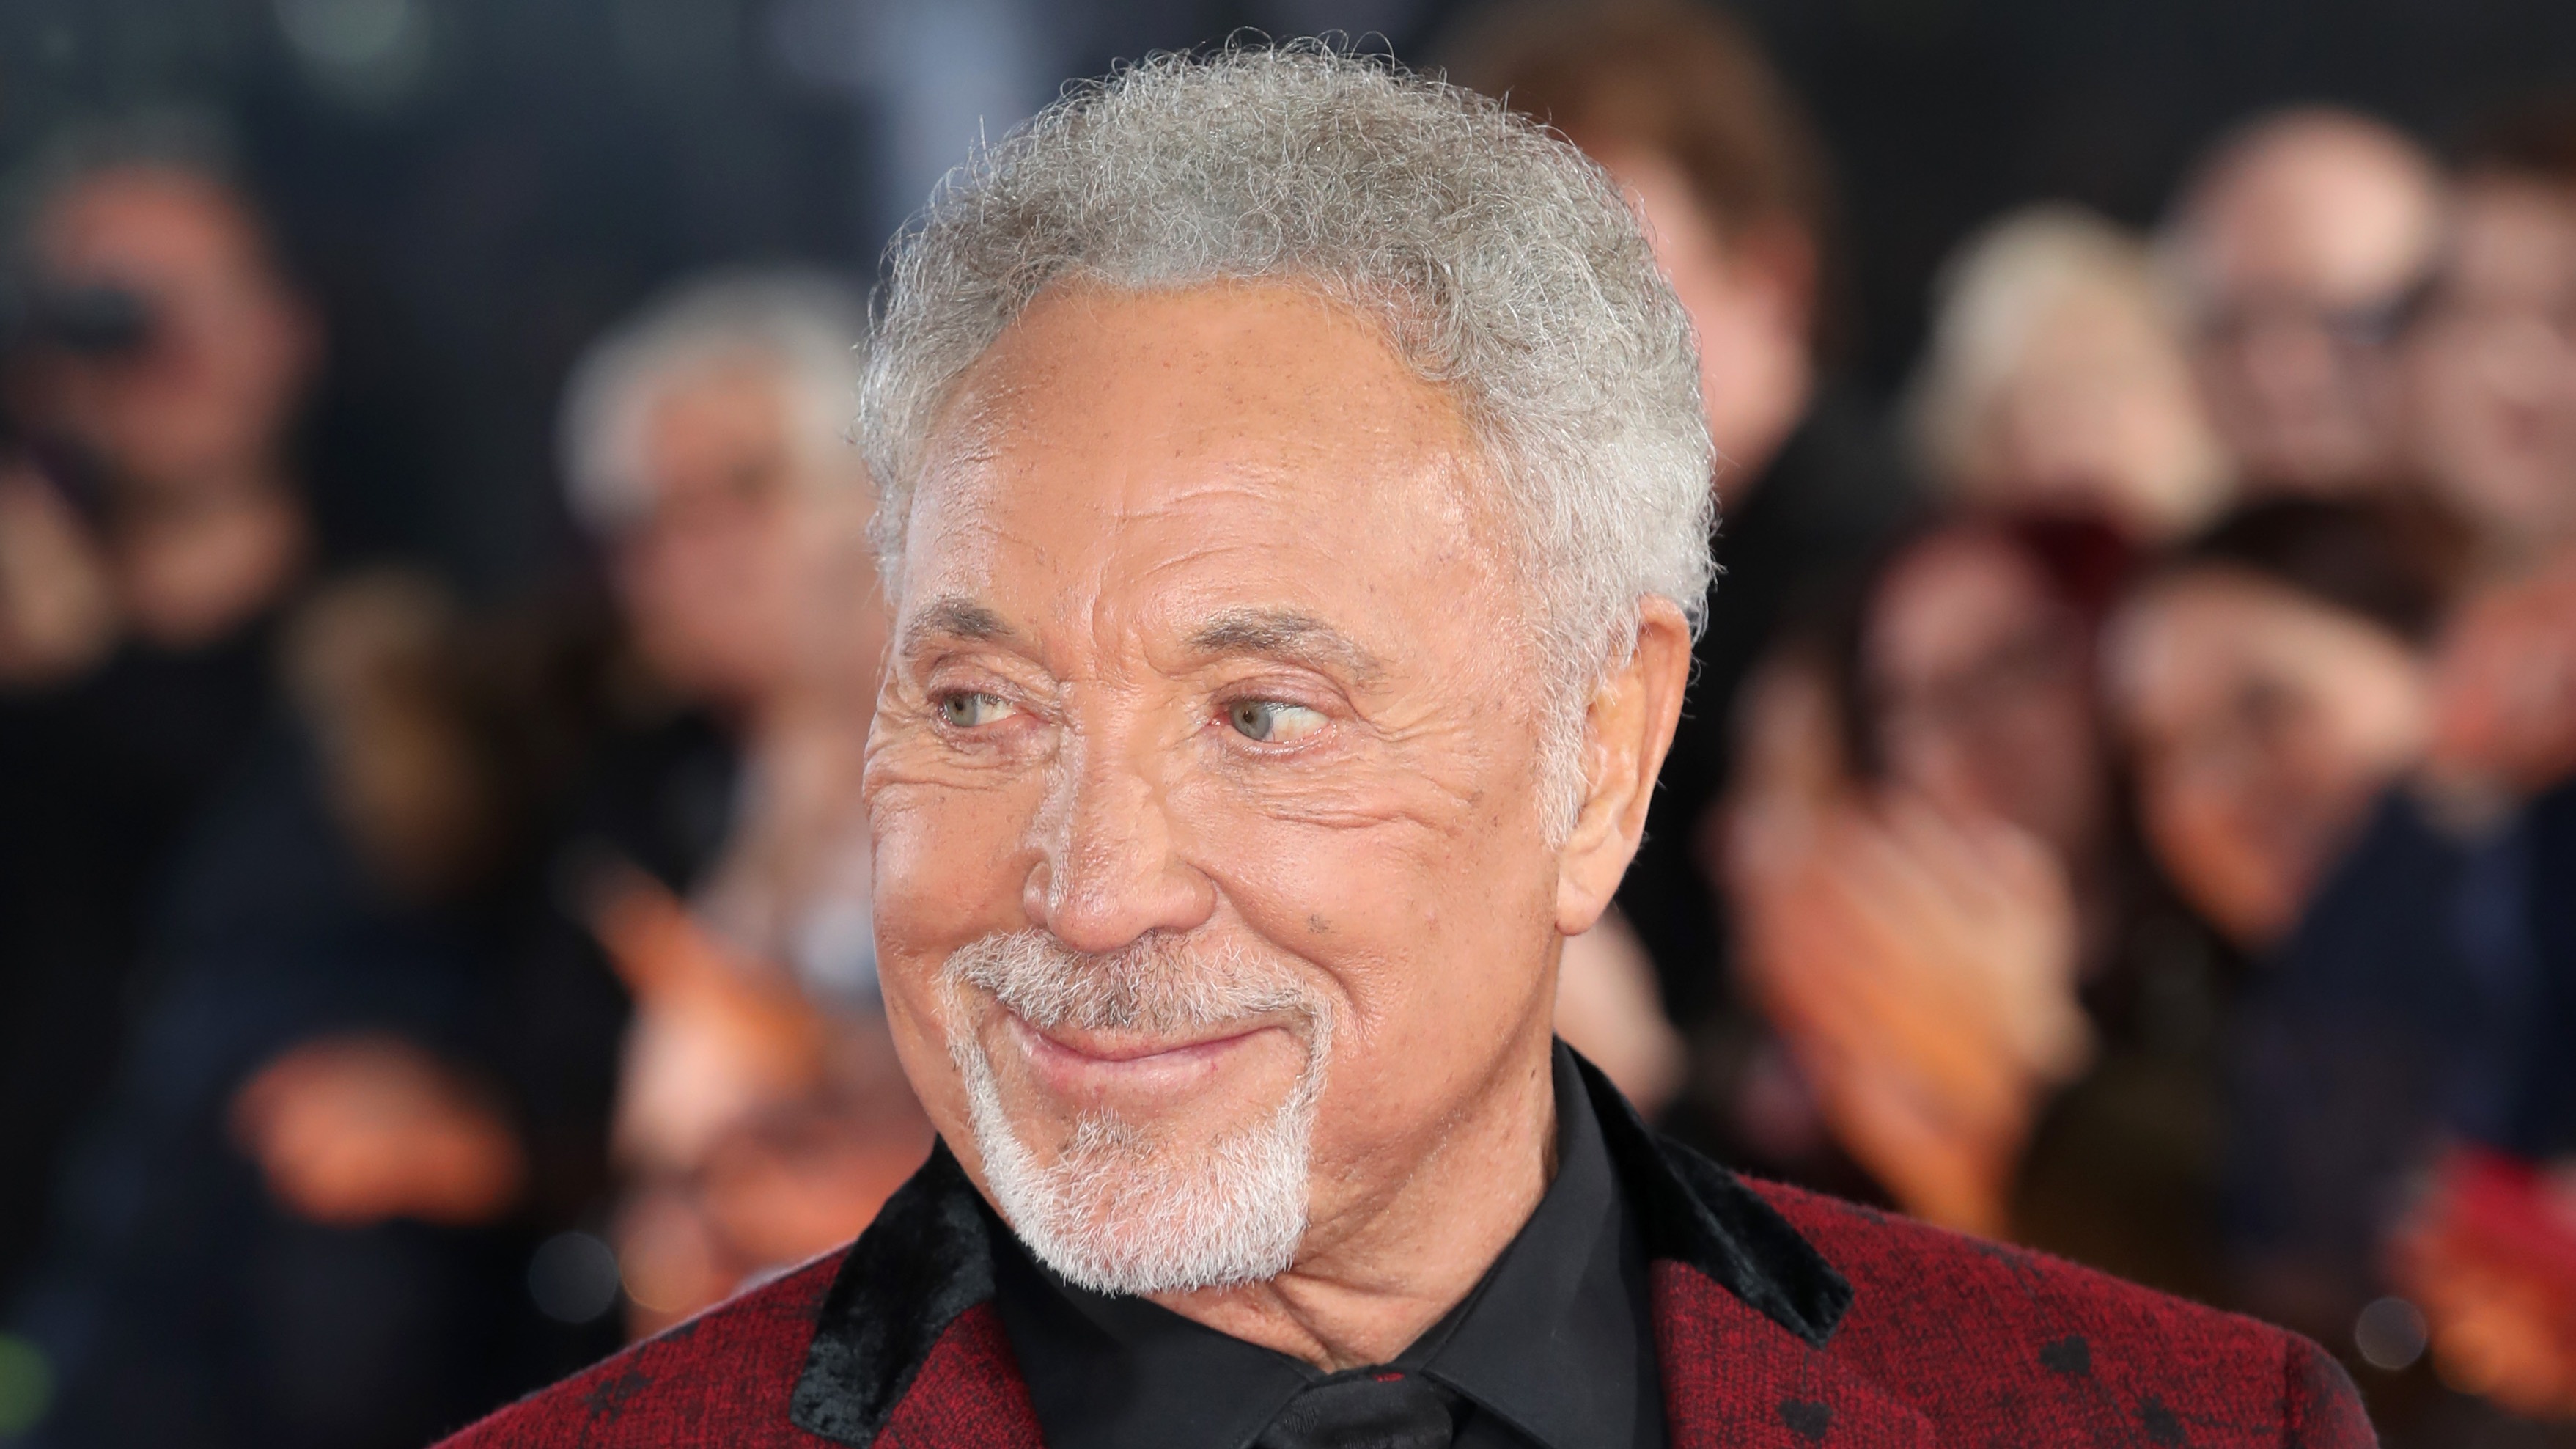 Sir Tom Jones Performance On The Voice Leaves Viewers And Fellow Judges Emotional Itv News Wales